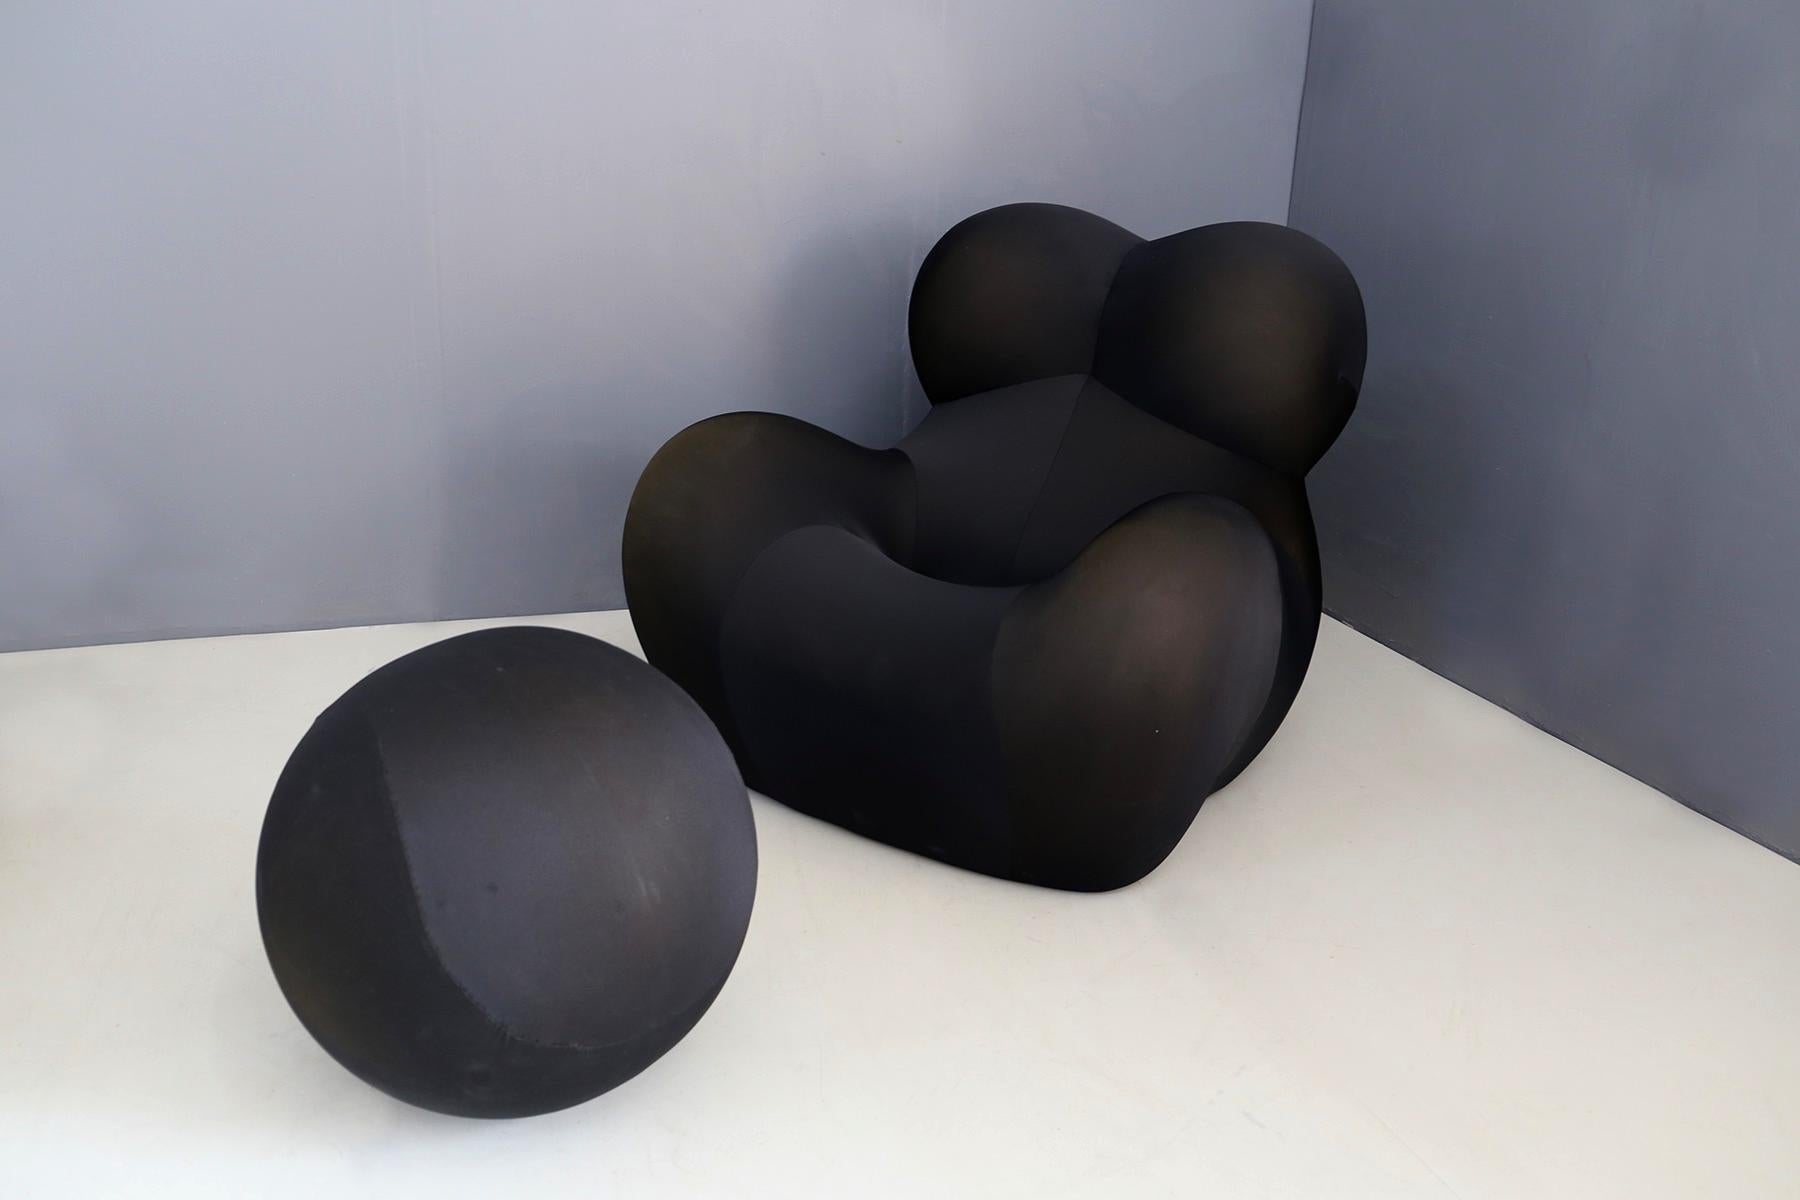 First designed by Gaetano Pesce in 1969 for a few years before being discontinued, the lounge chair and pouf UP5, also known as Big Mama, Blow Up and Donna, was reissued in 2000 by B&B Italia.
Feminine silhouette with the UP6 pouf, which attaches